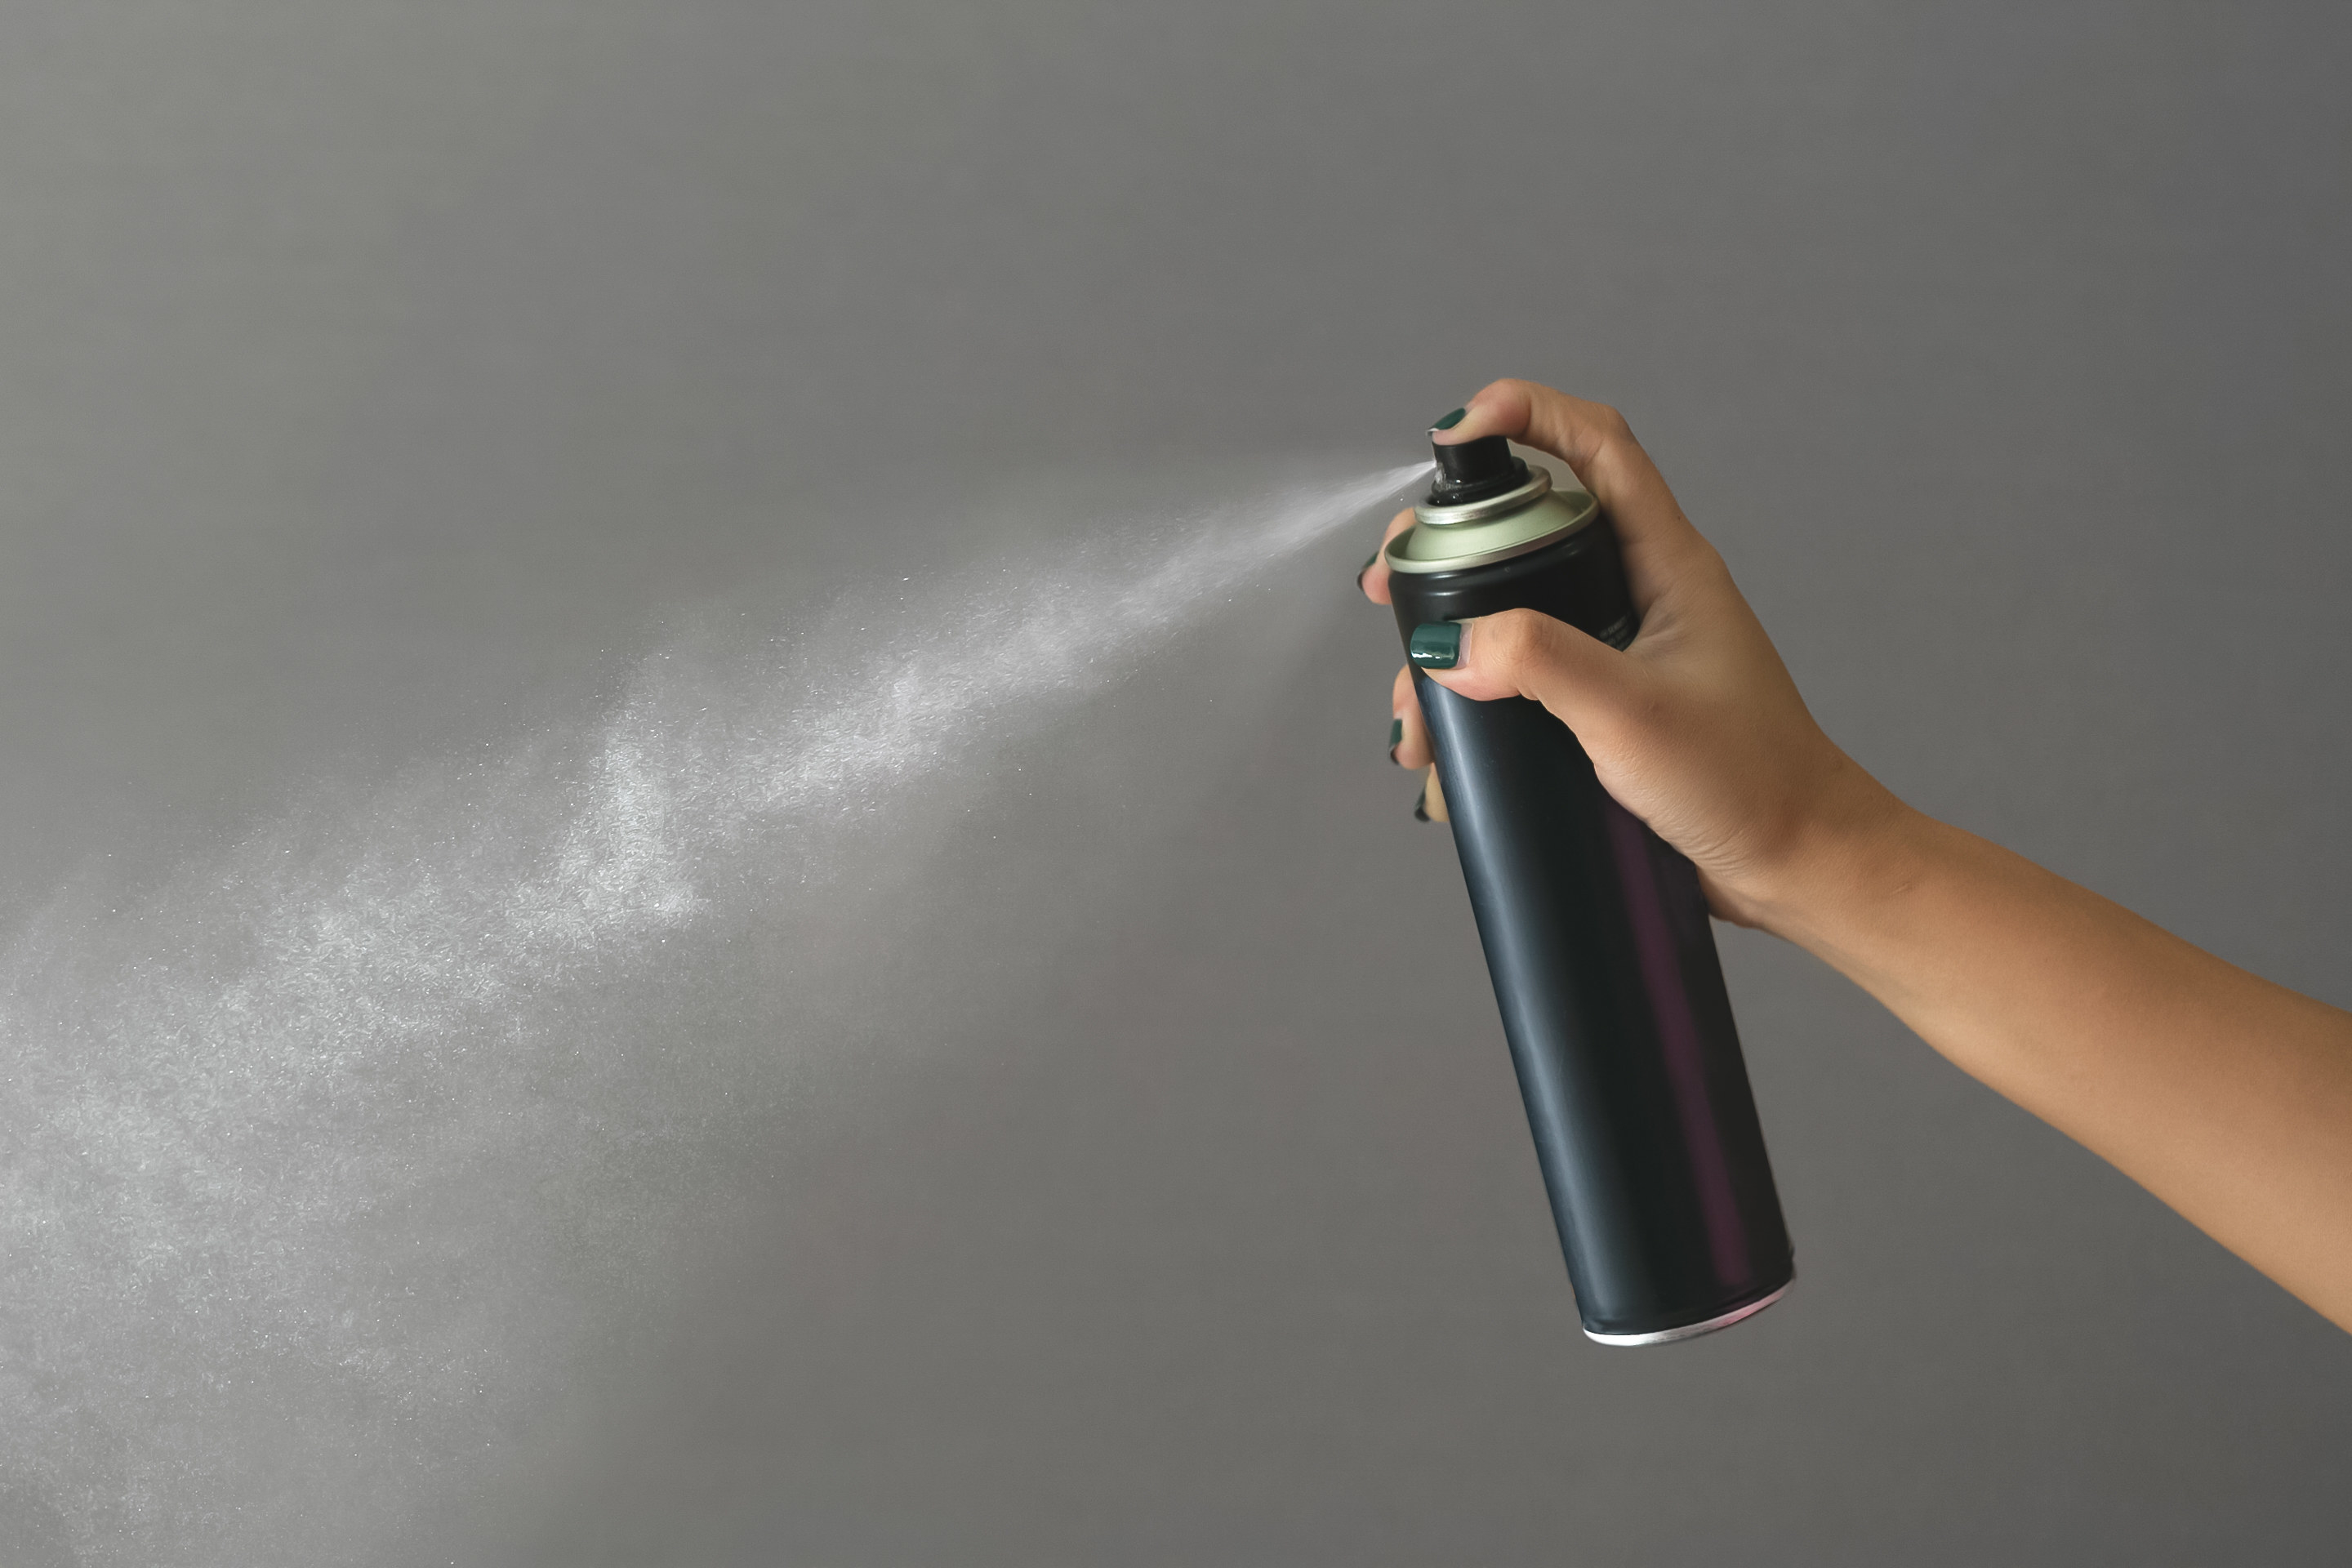 A black can of hairspray being sprayed